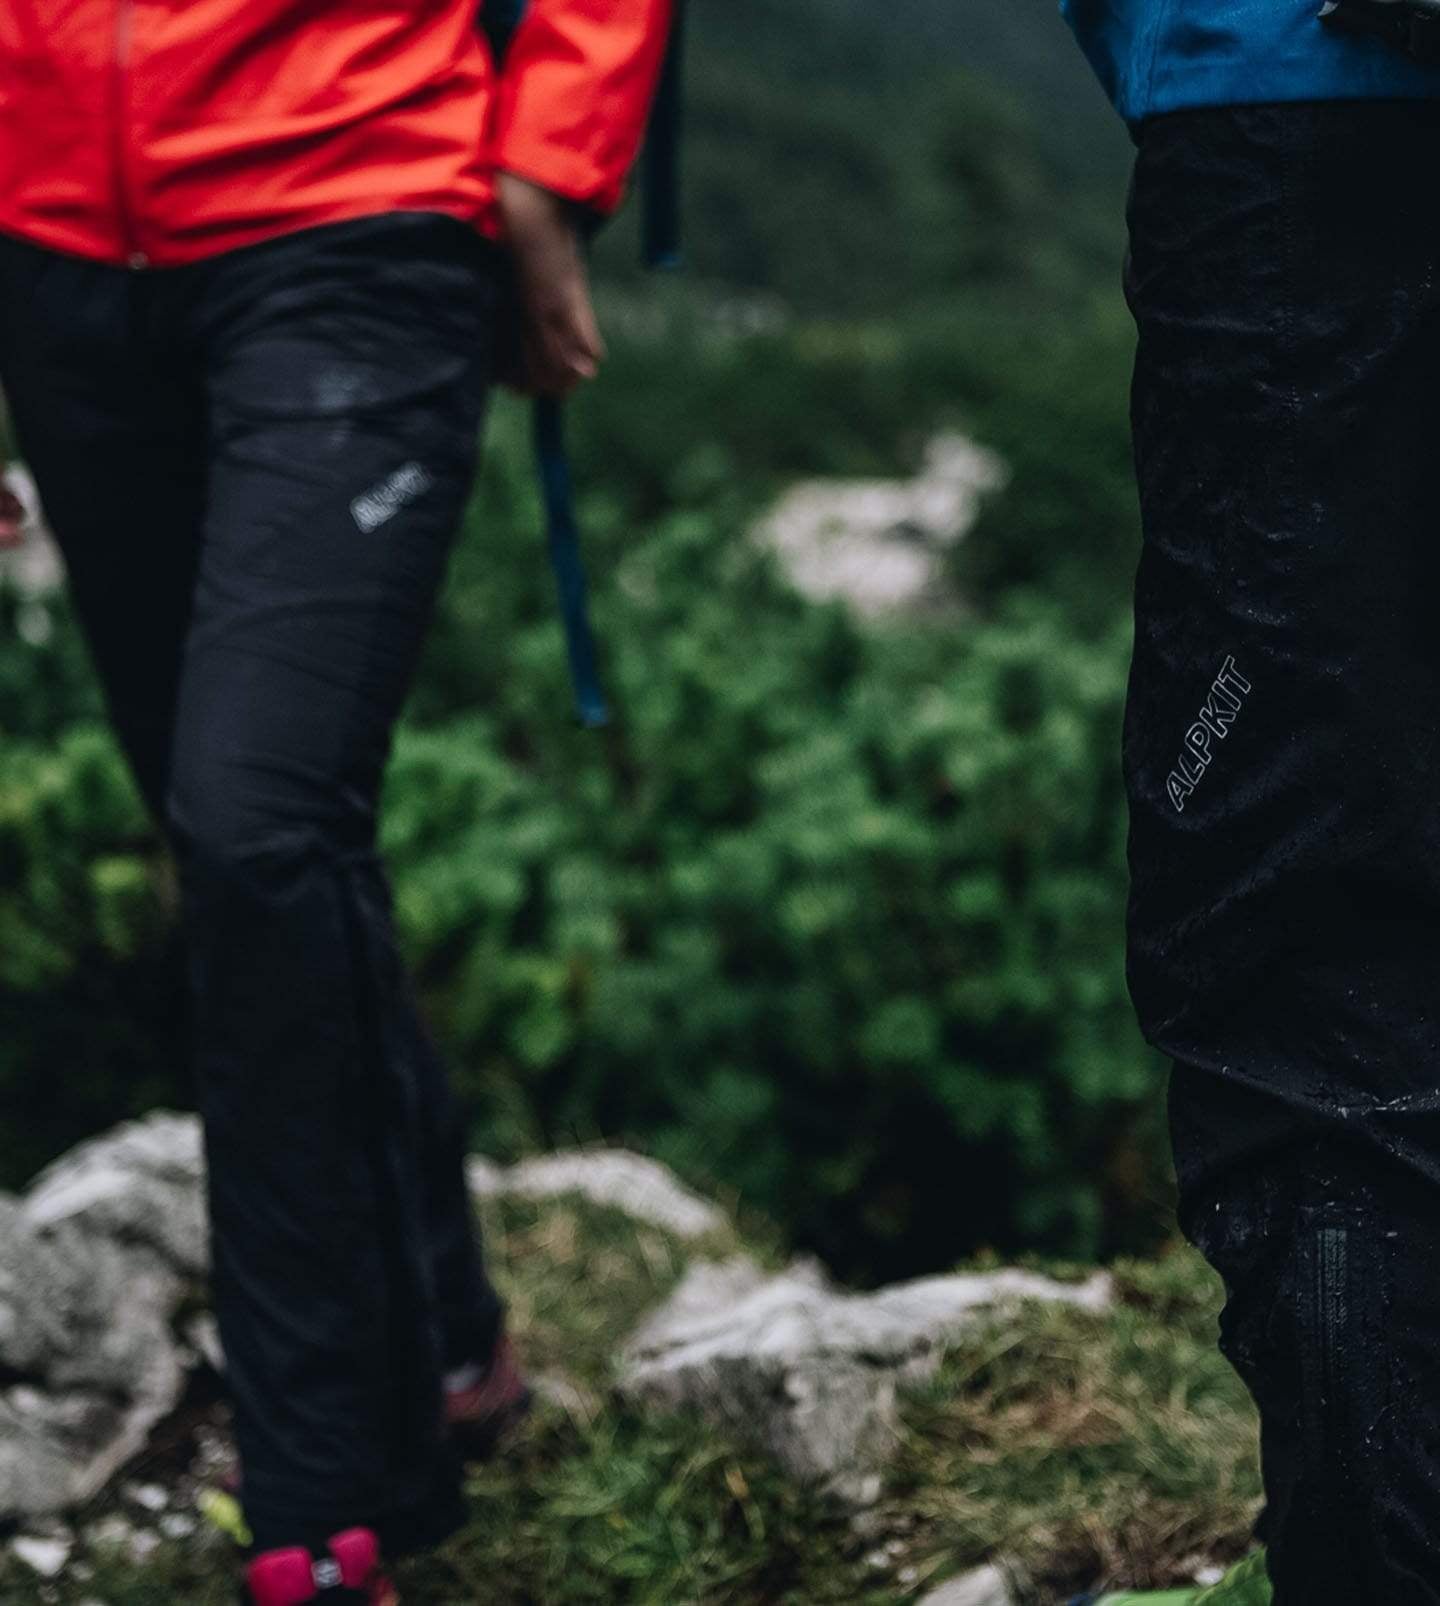 Parallax Men's Lightweight and Packable Waterproof Trousers